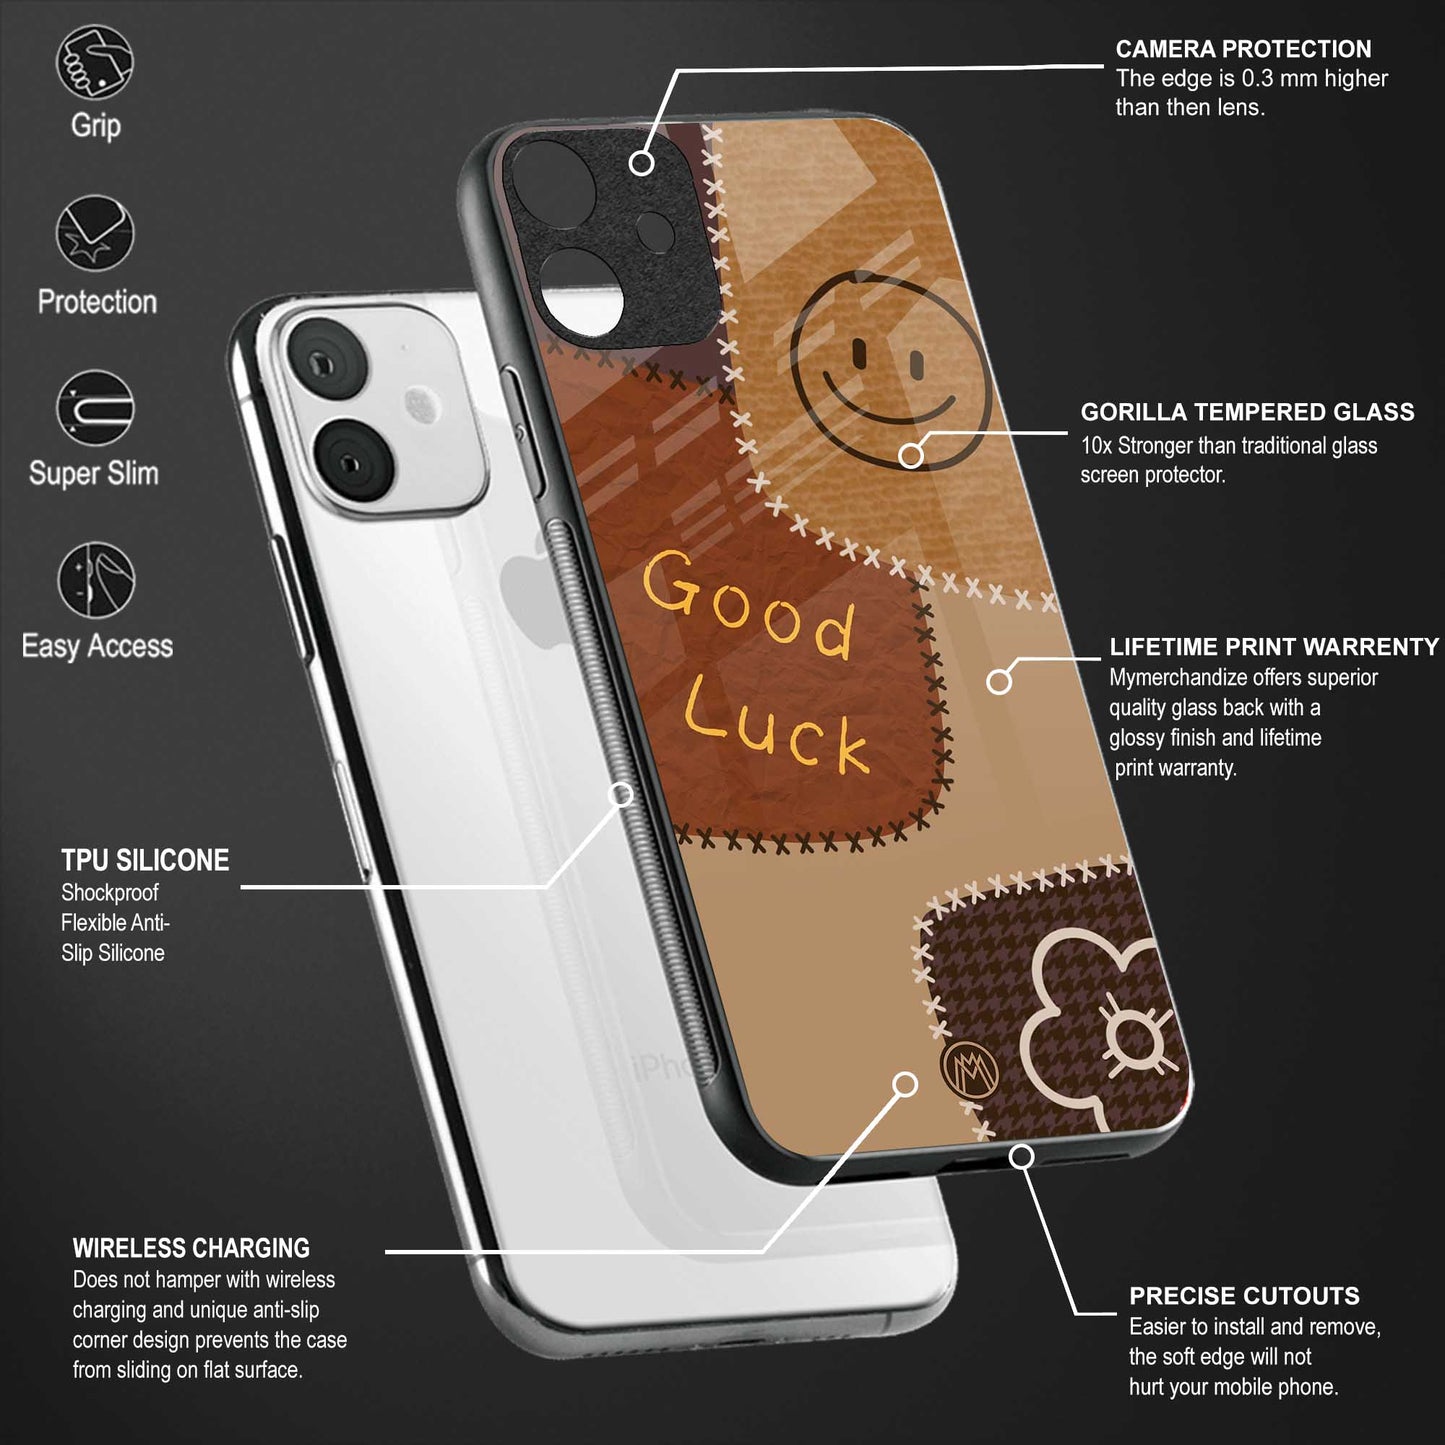 good luck glass case for iphone 12 mini image-4